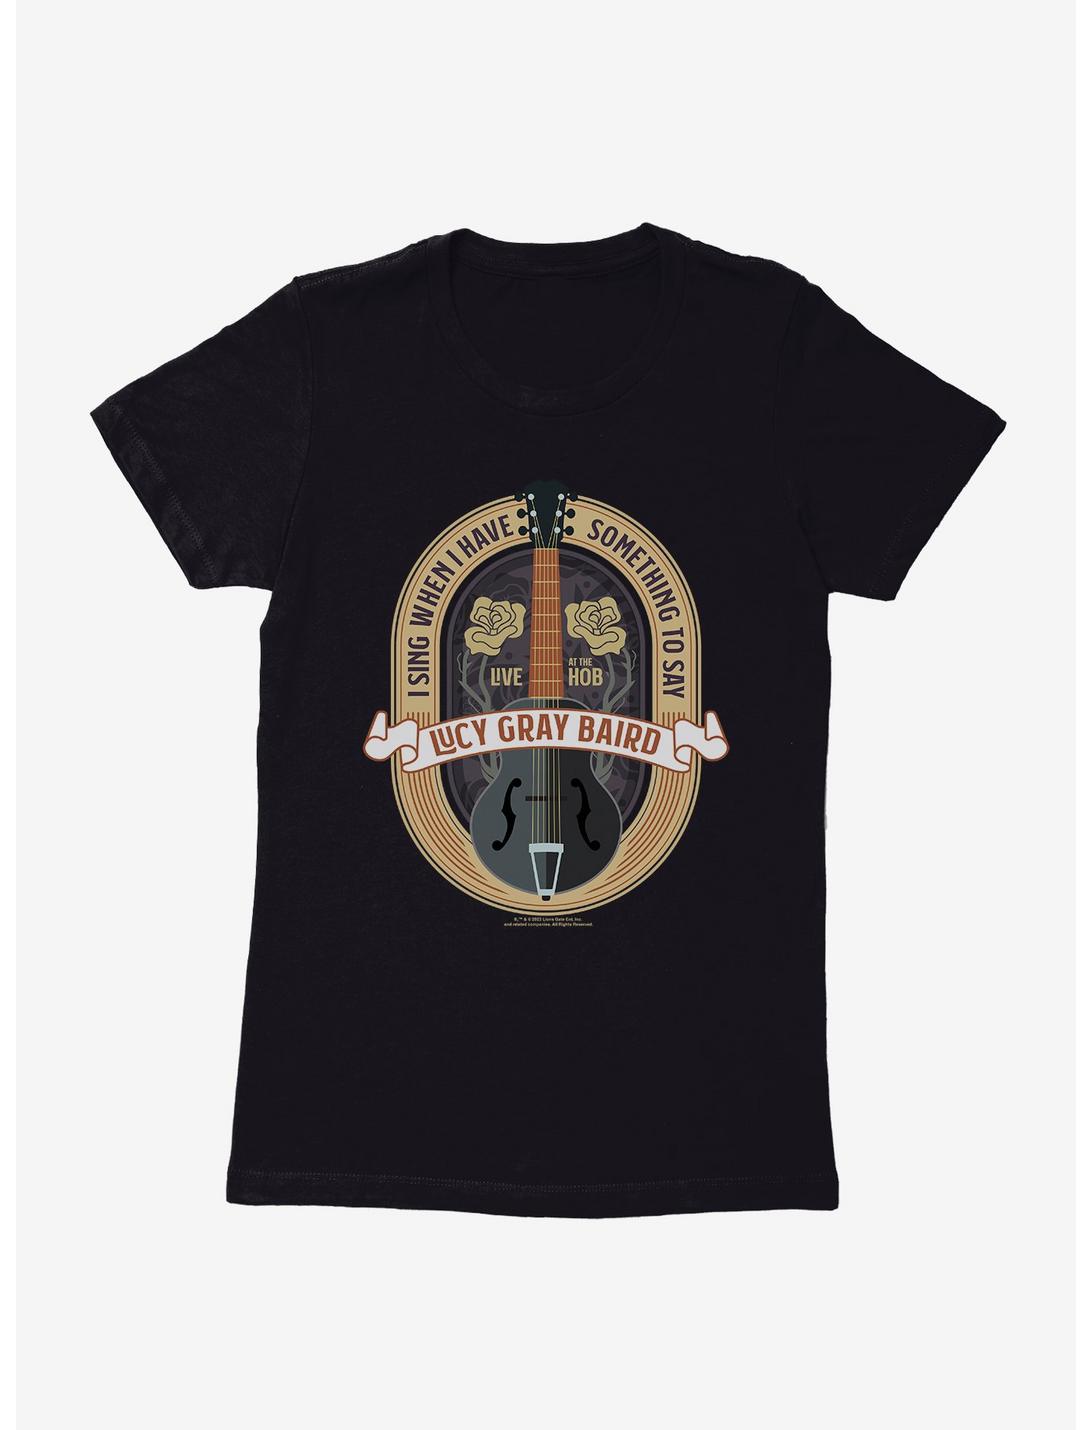 Hunger Games: The Ballad Of Songbirds And Snakes Lucy Gray Baird I Sing Womens T-Shirt, BLACK, hi-res